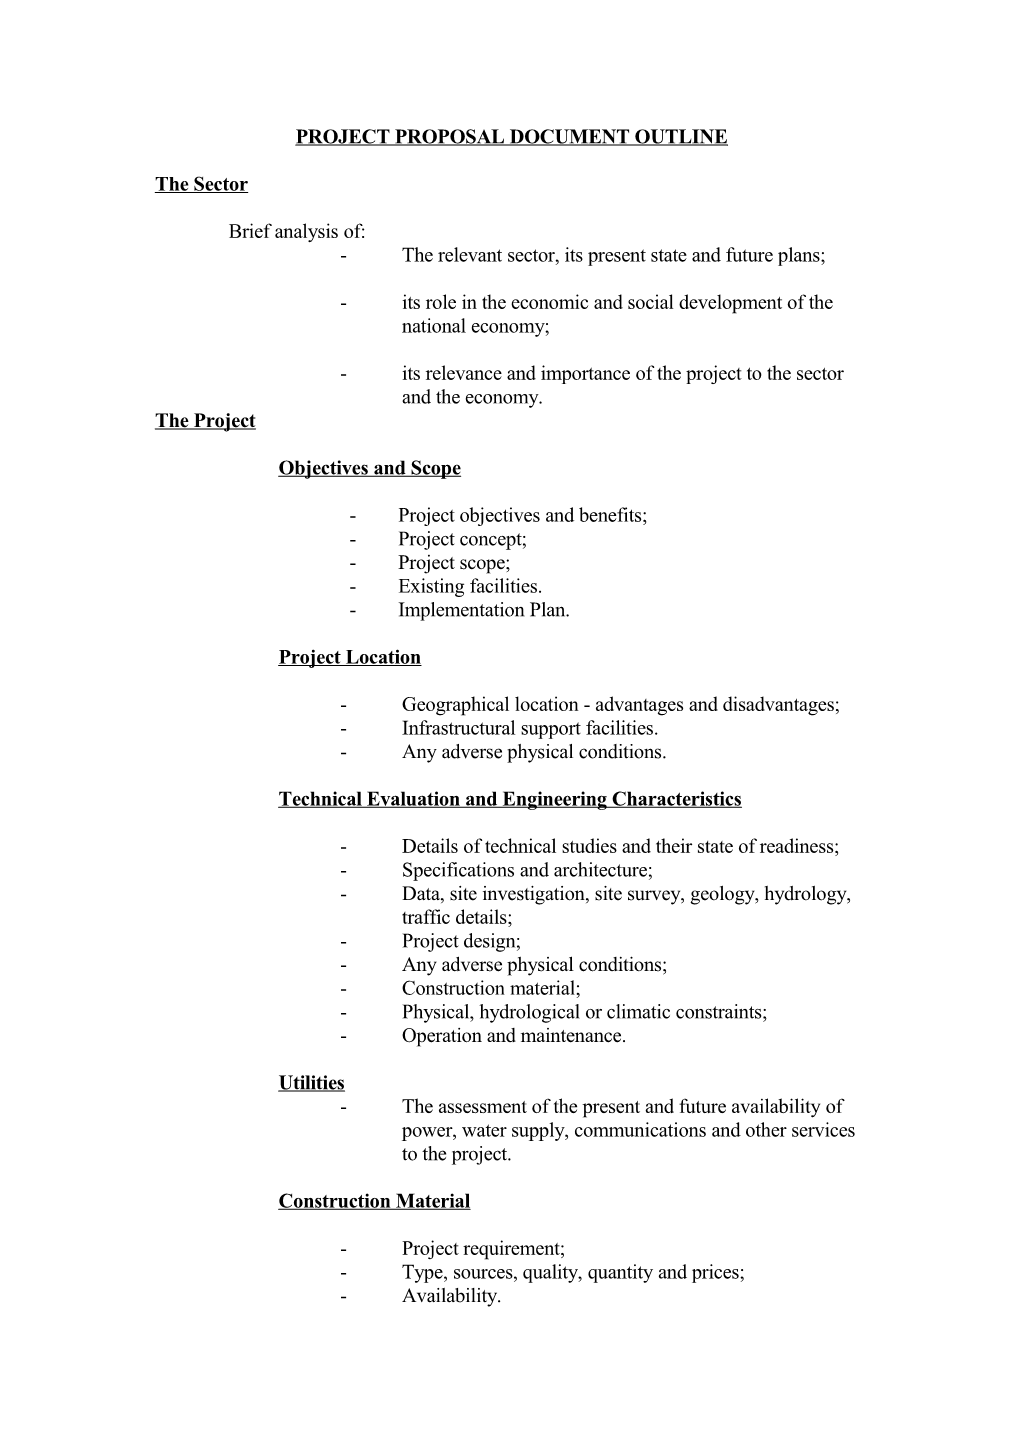 Project Proposal Document Outline